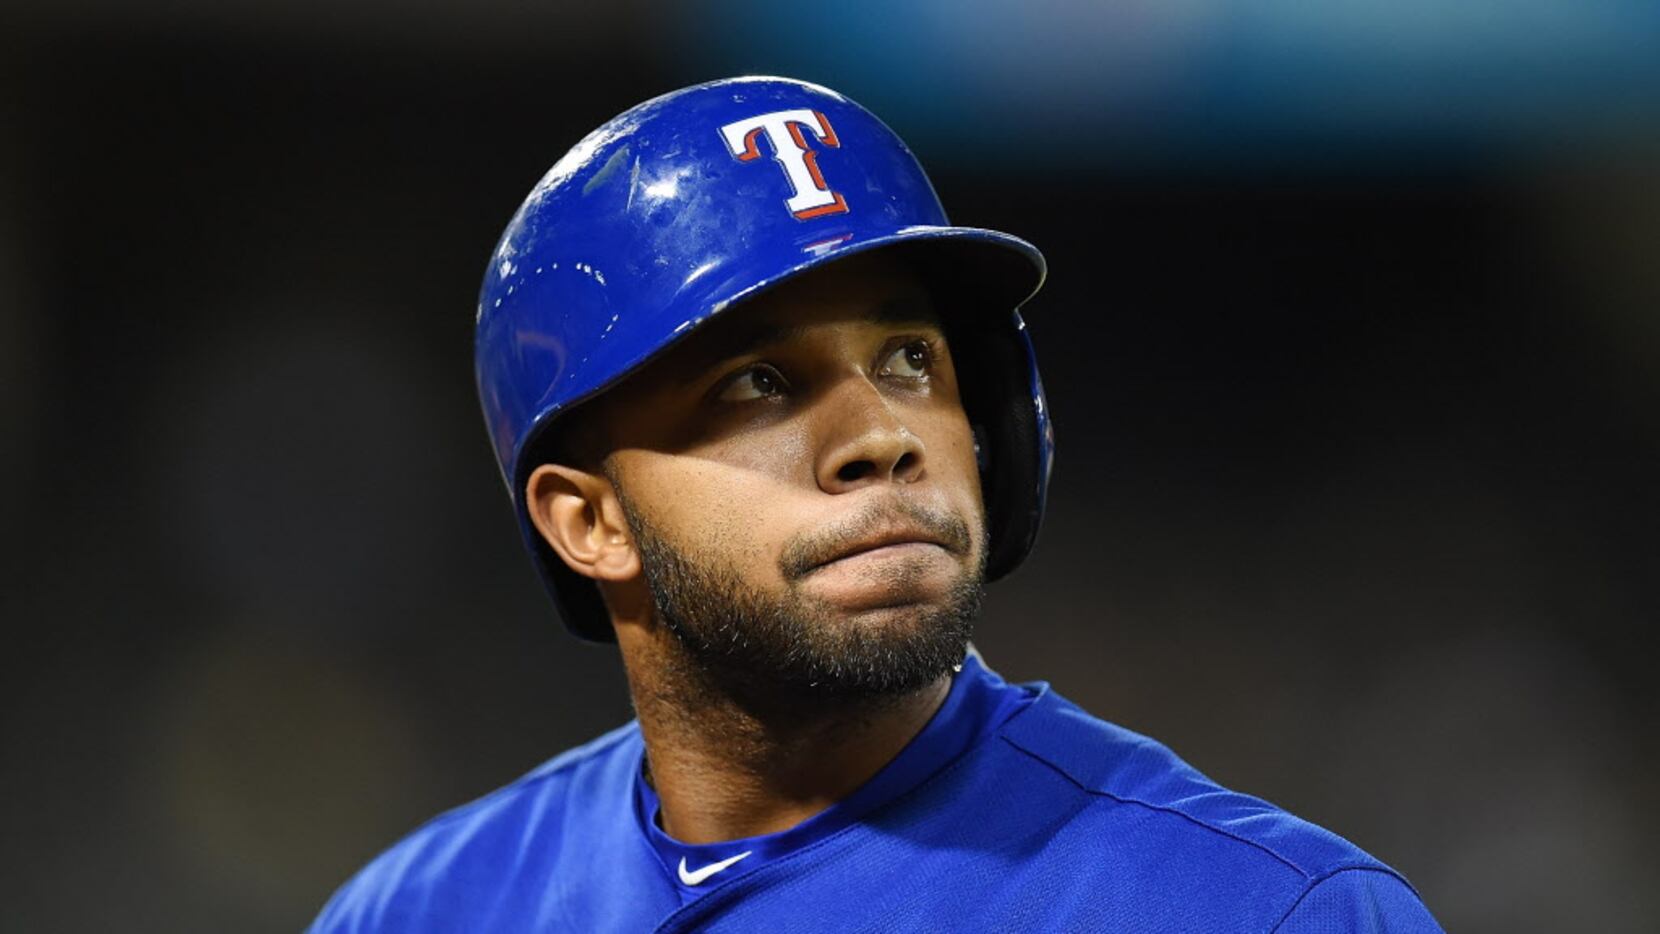 Elvis Andrus: The Family Man